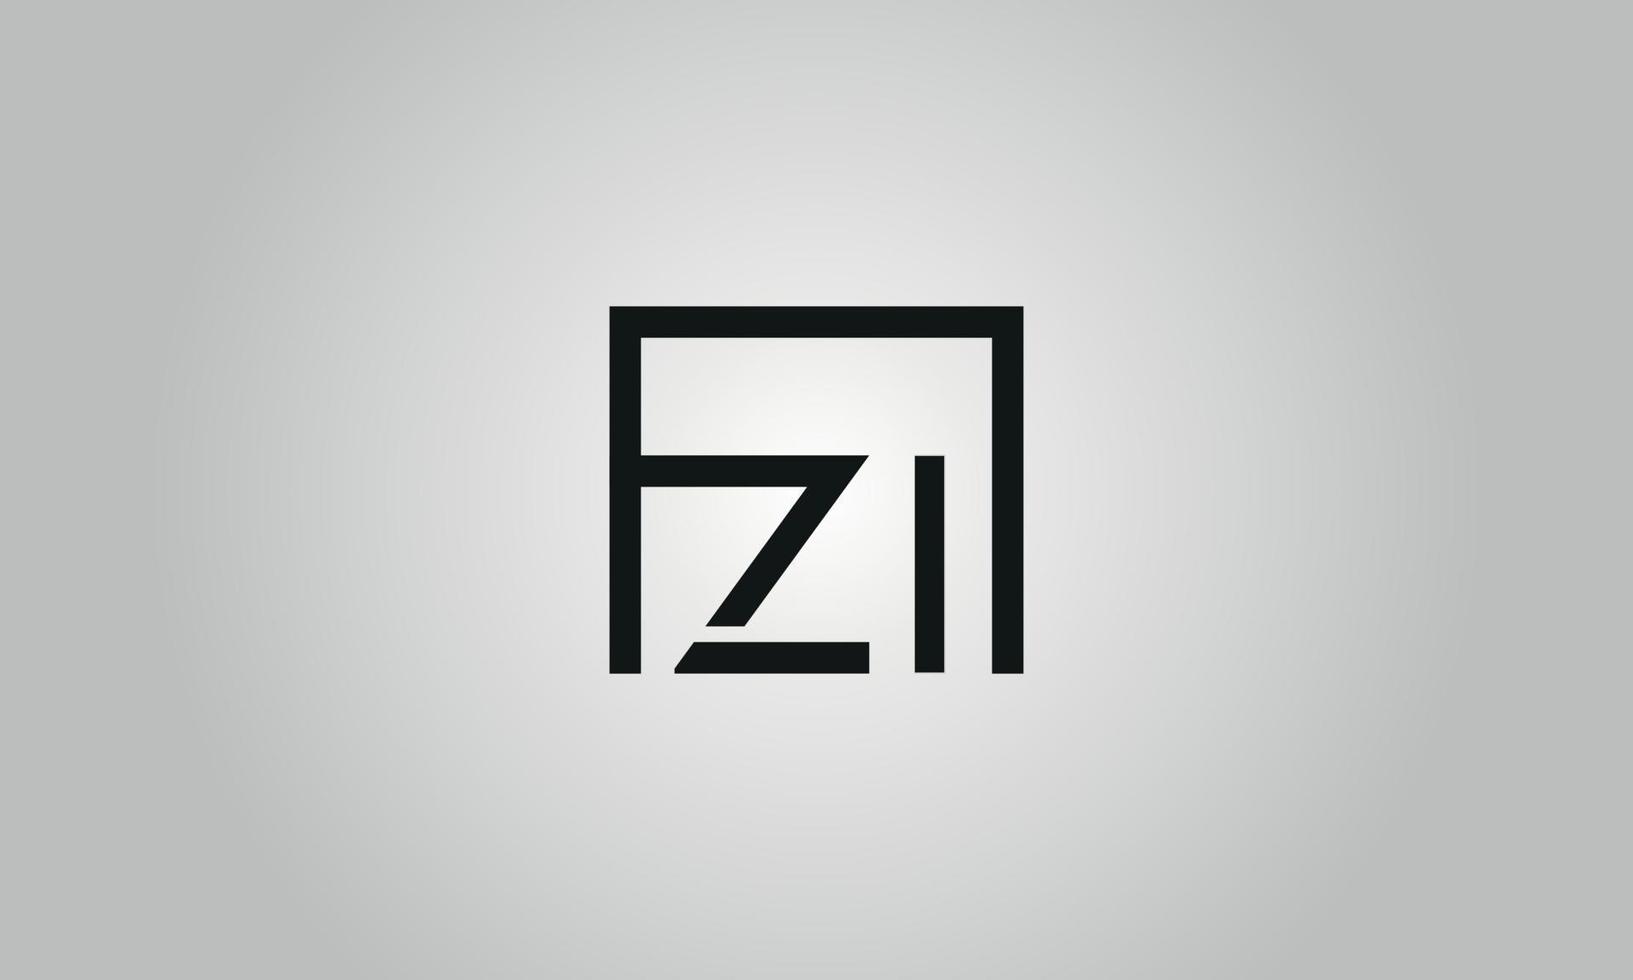 Letter ZI logo design. ZI logo with square shape in black colors vector free vector template.